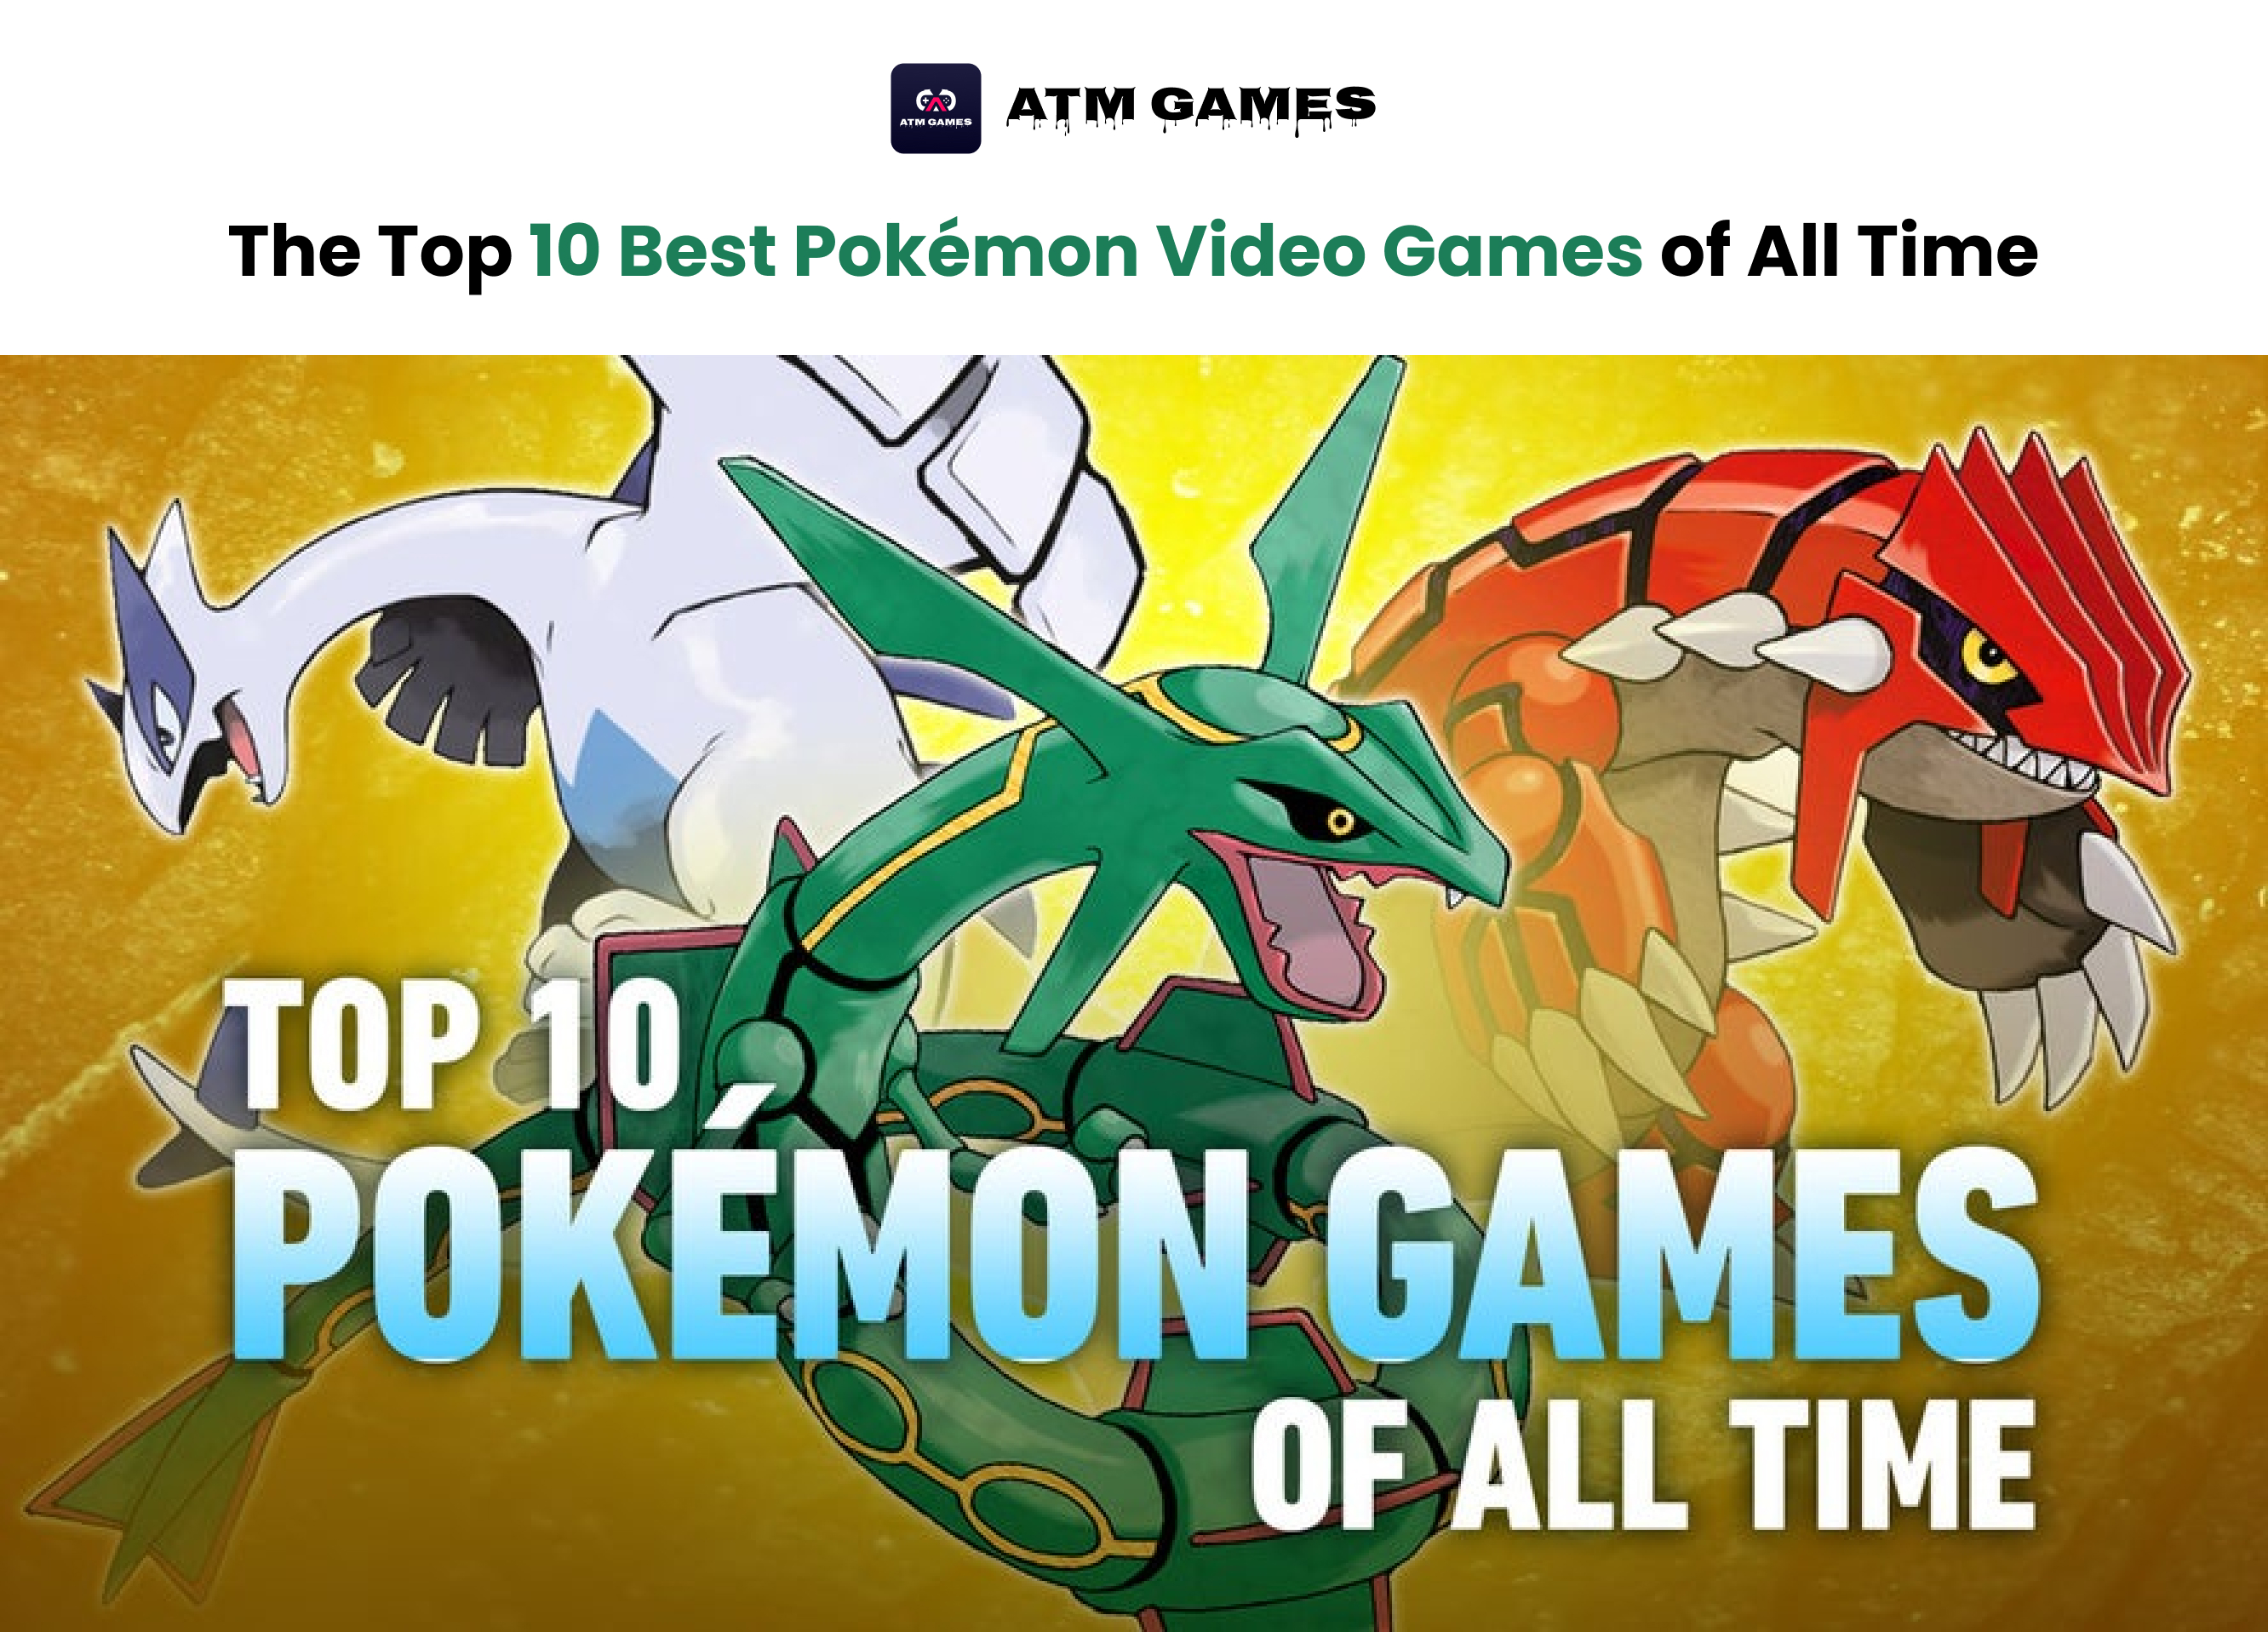 The 10 Best Pokémon Video Games of All Time